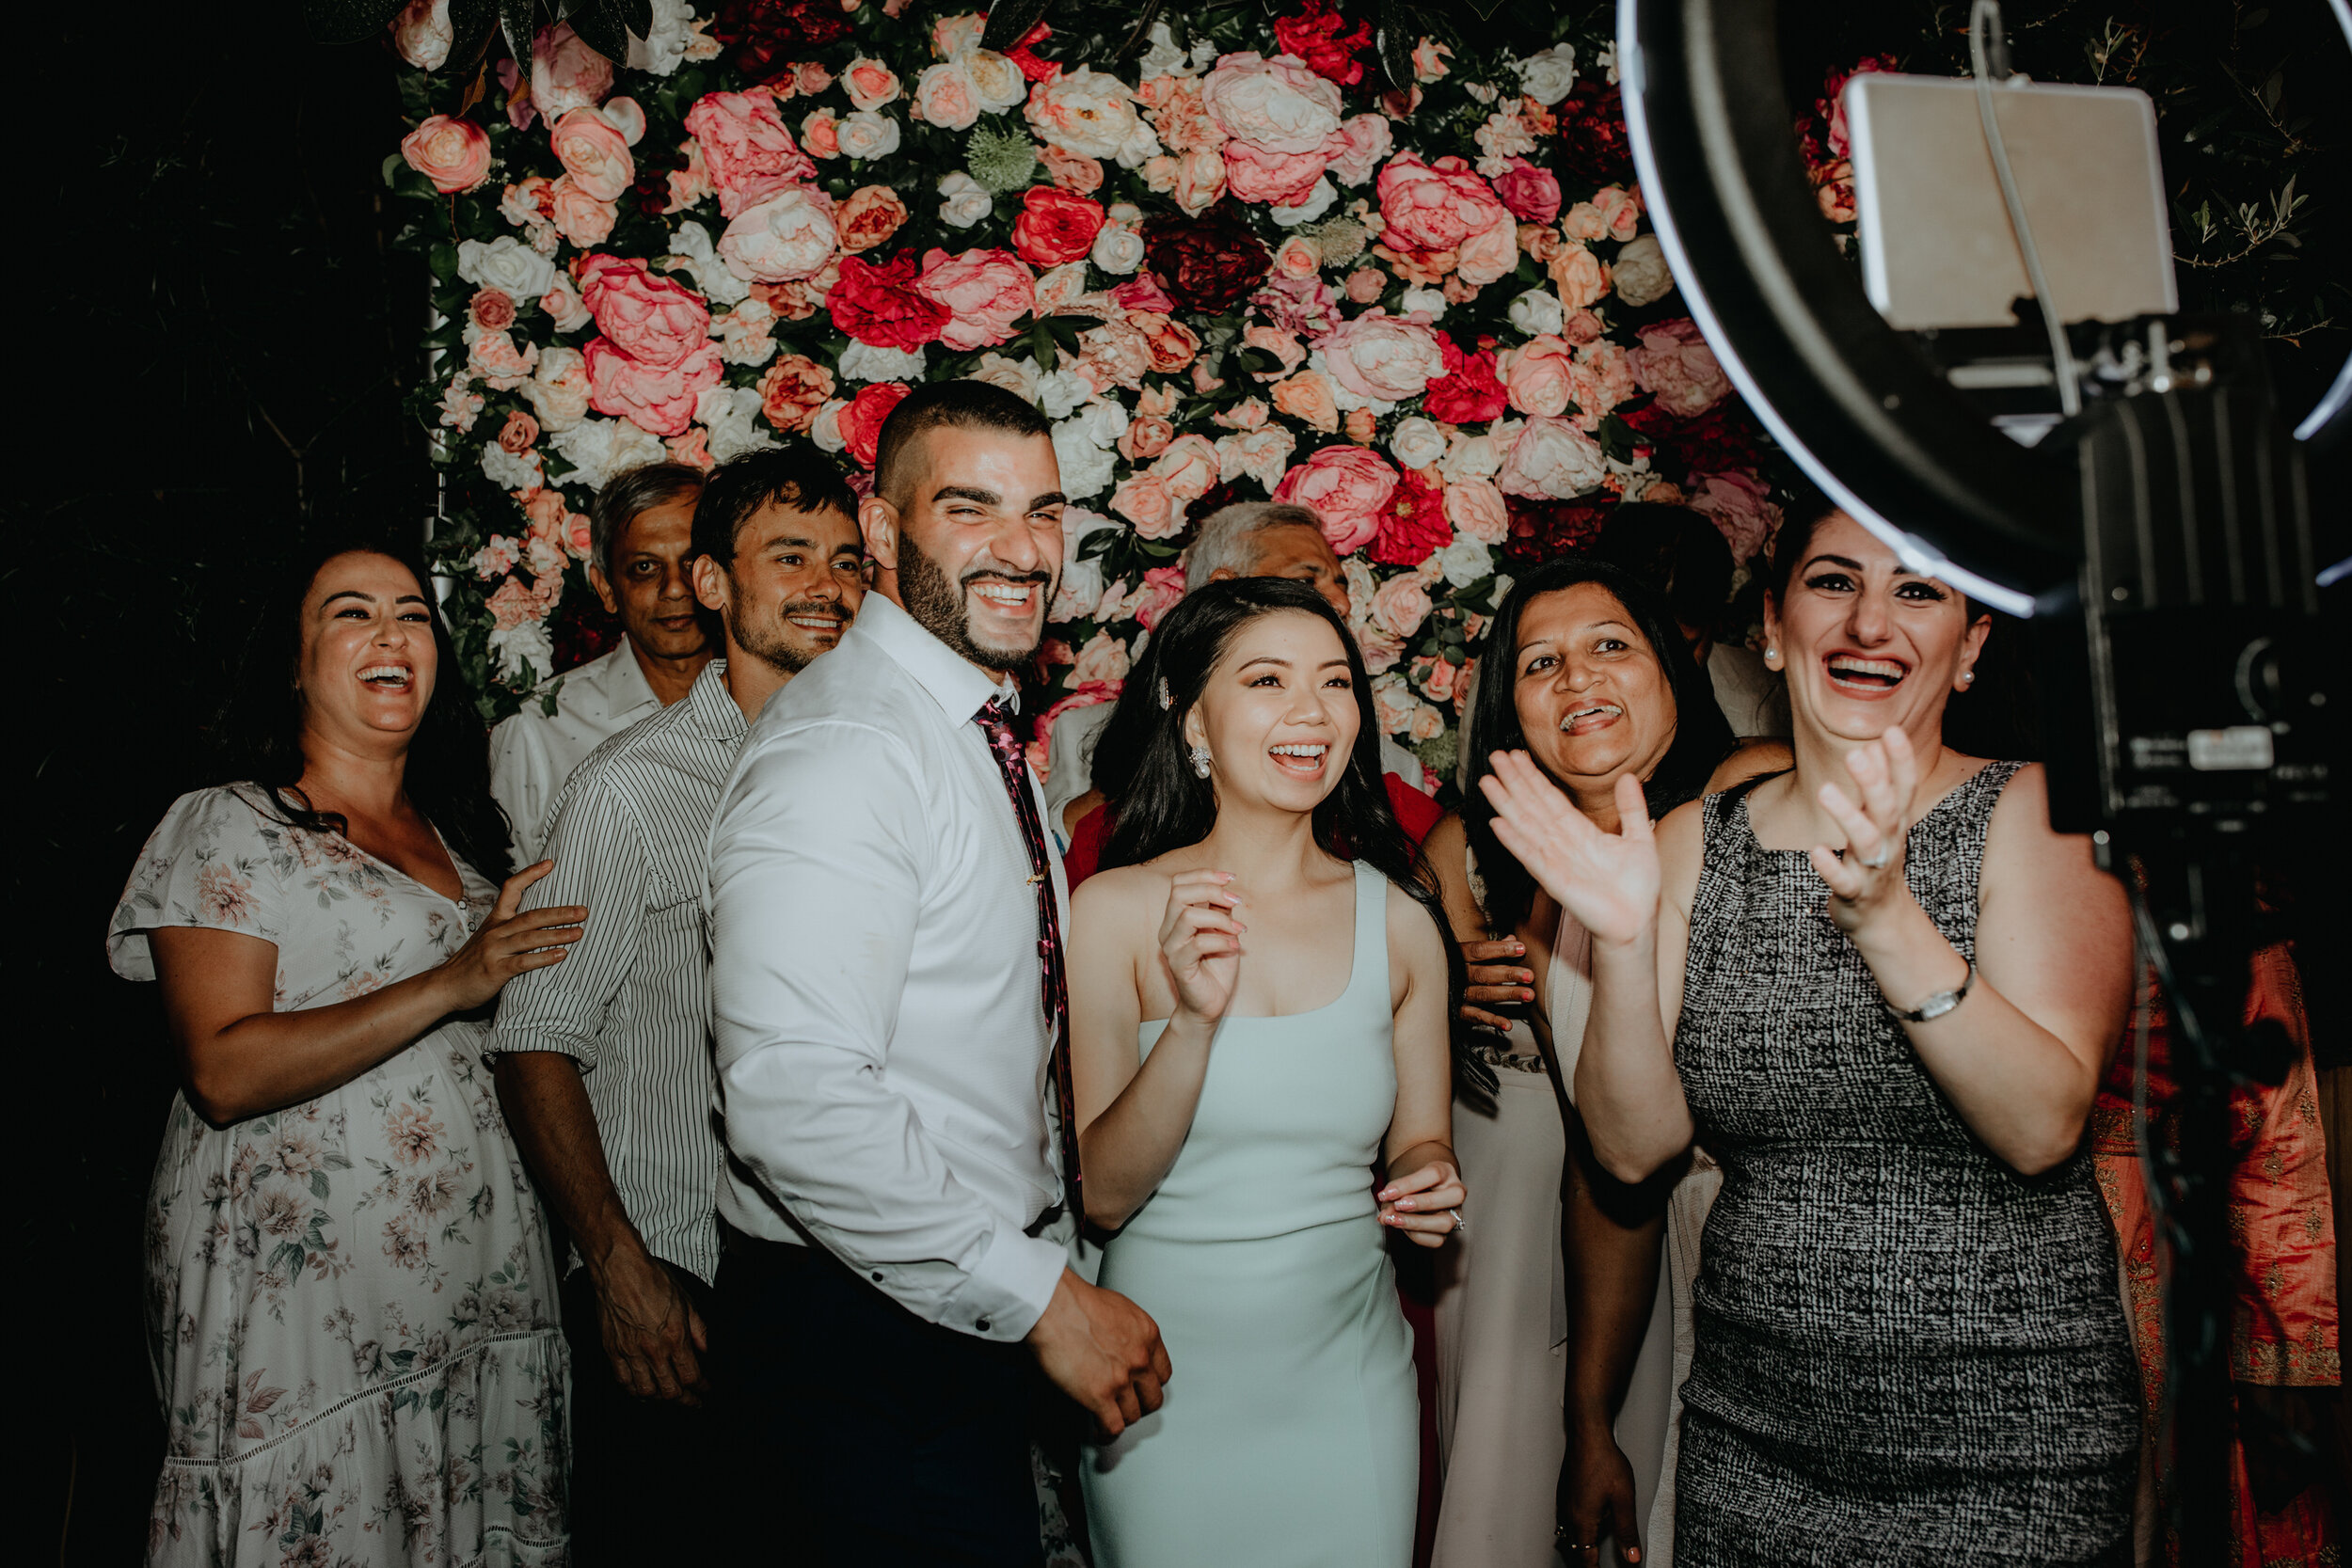 Glasshouse morningside | Auckland | Auckland wedding photographer | New Zealand wedding photographer | Wanting Huang Photography